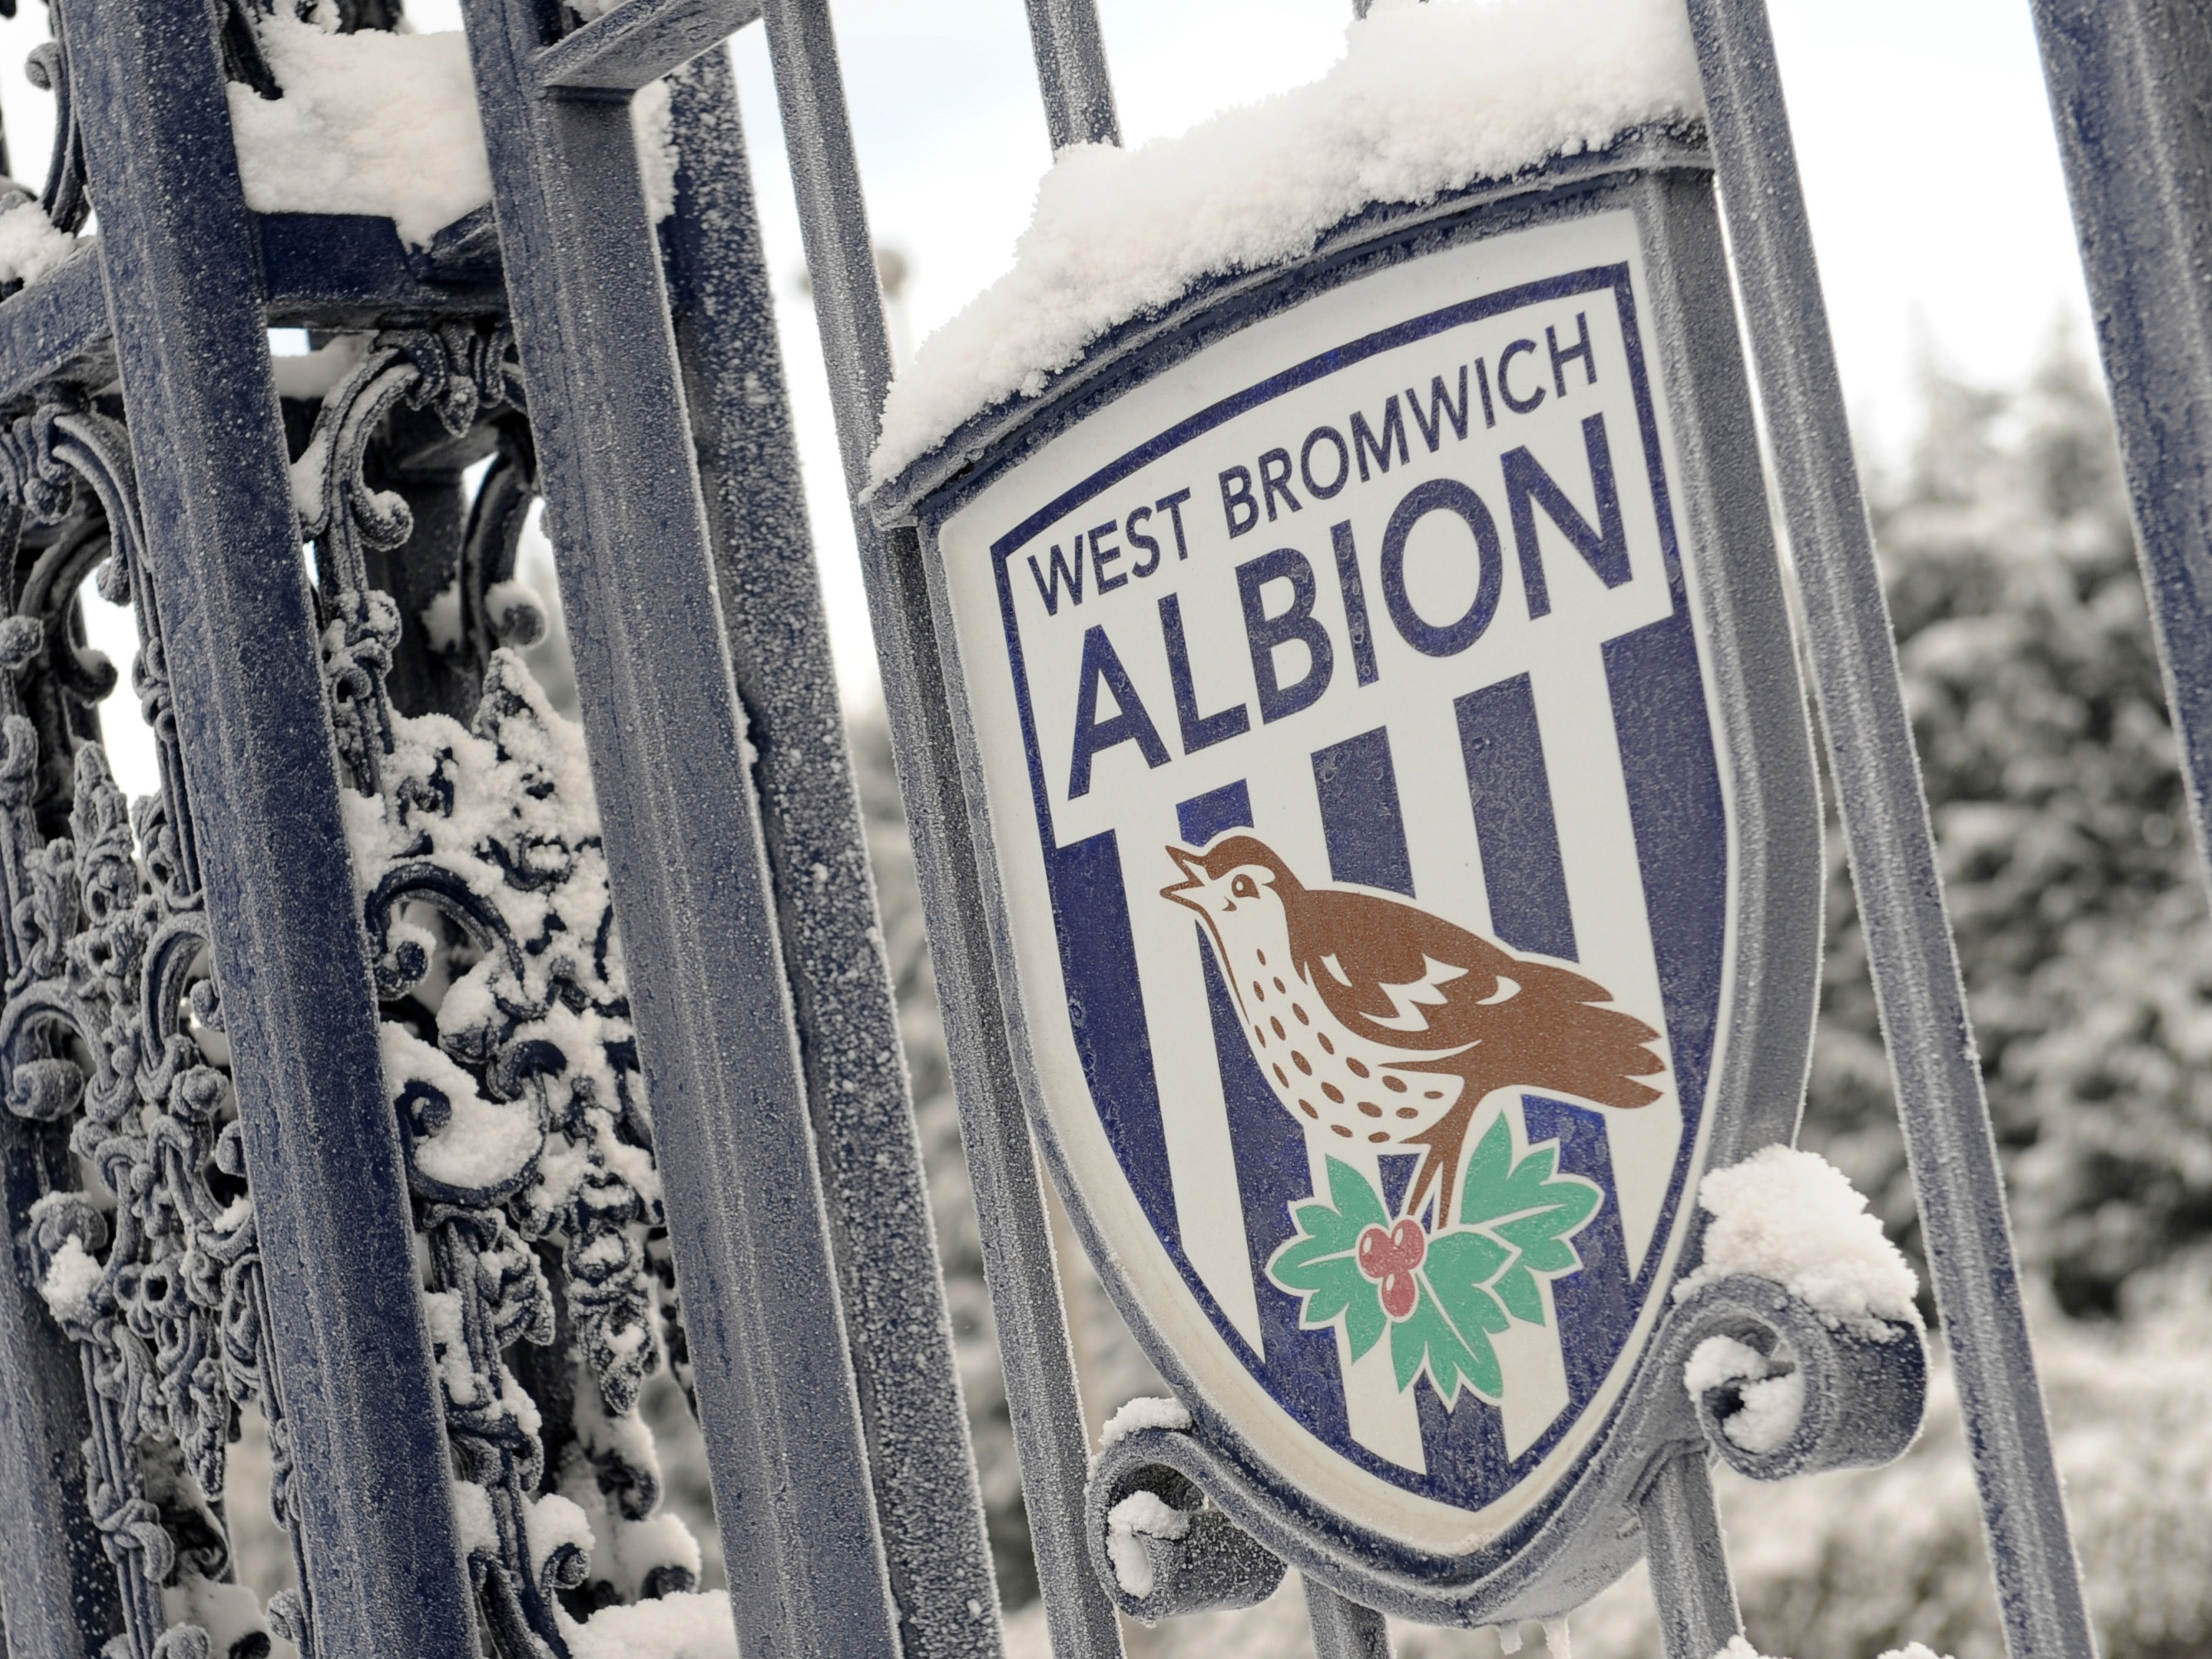 Albion badge on the Astle Gates frosting